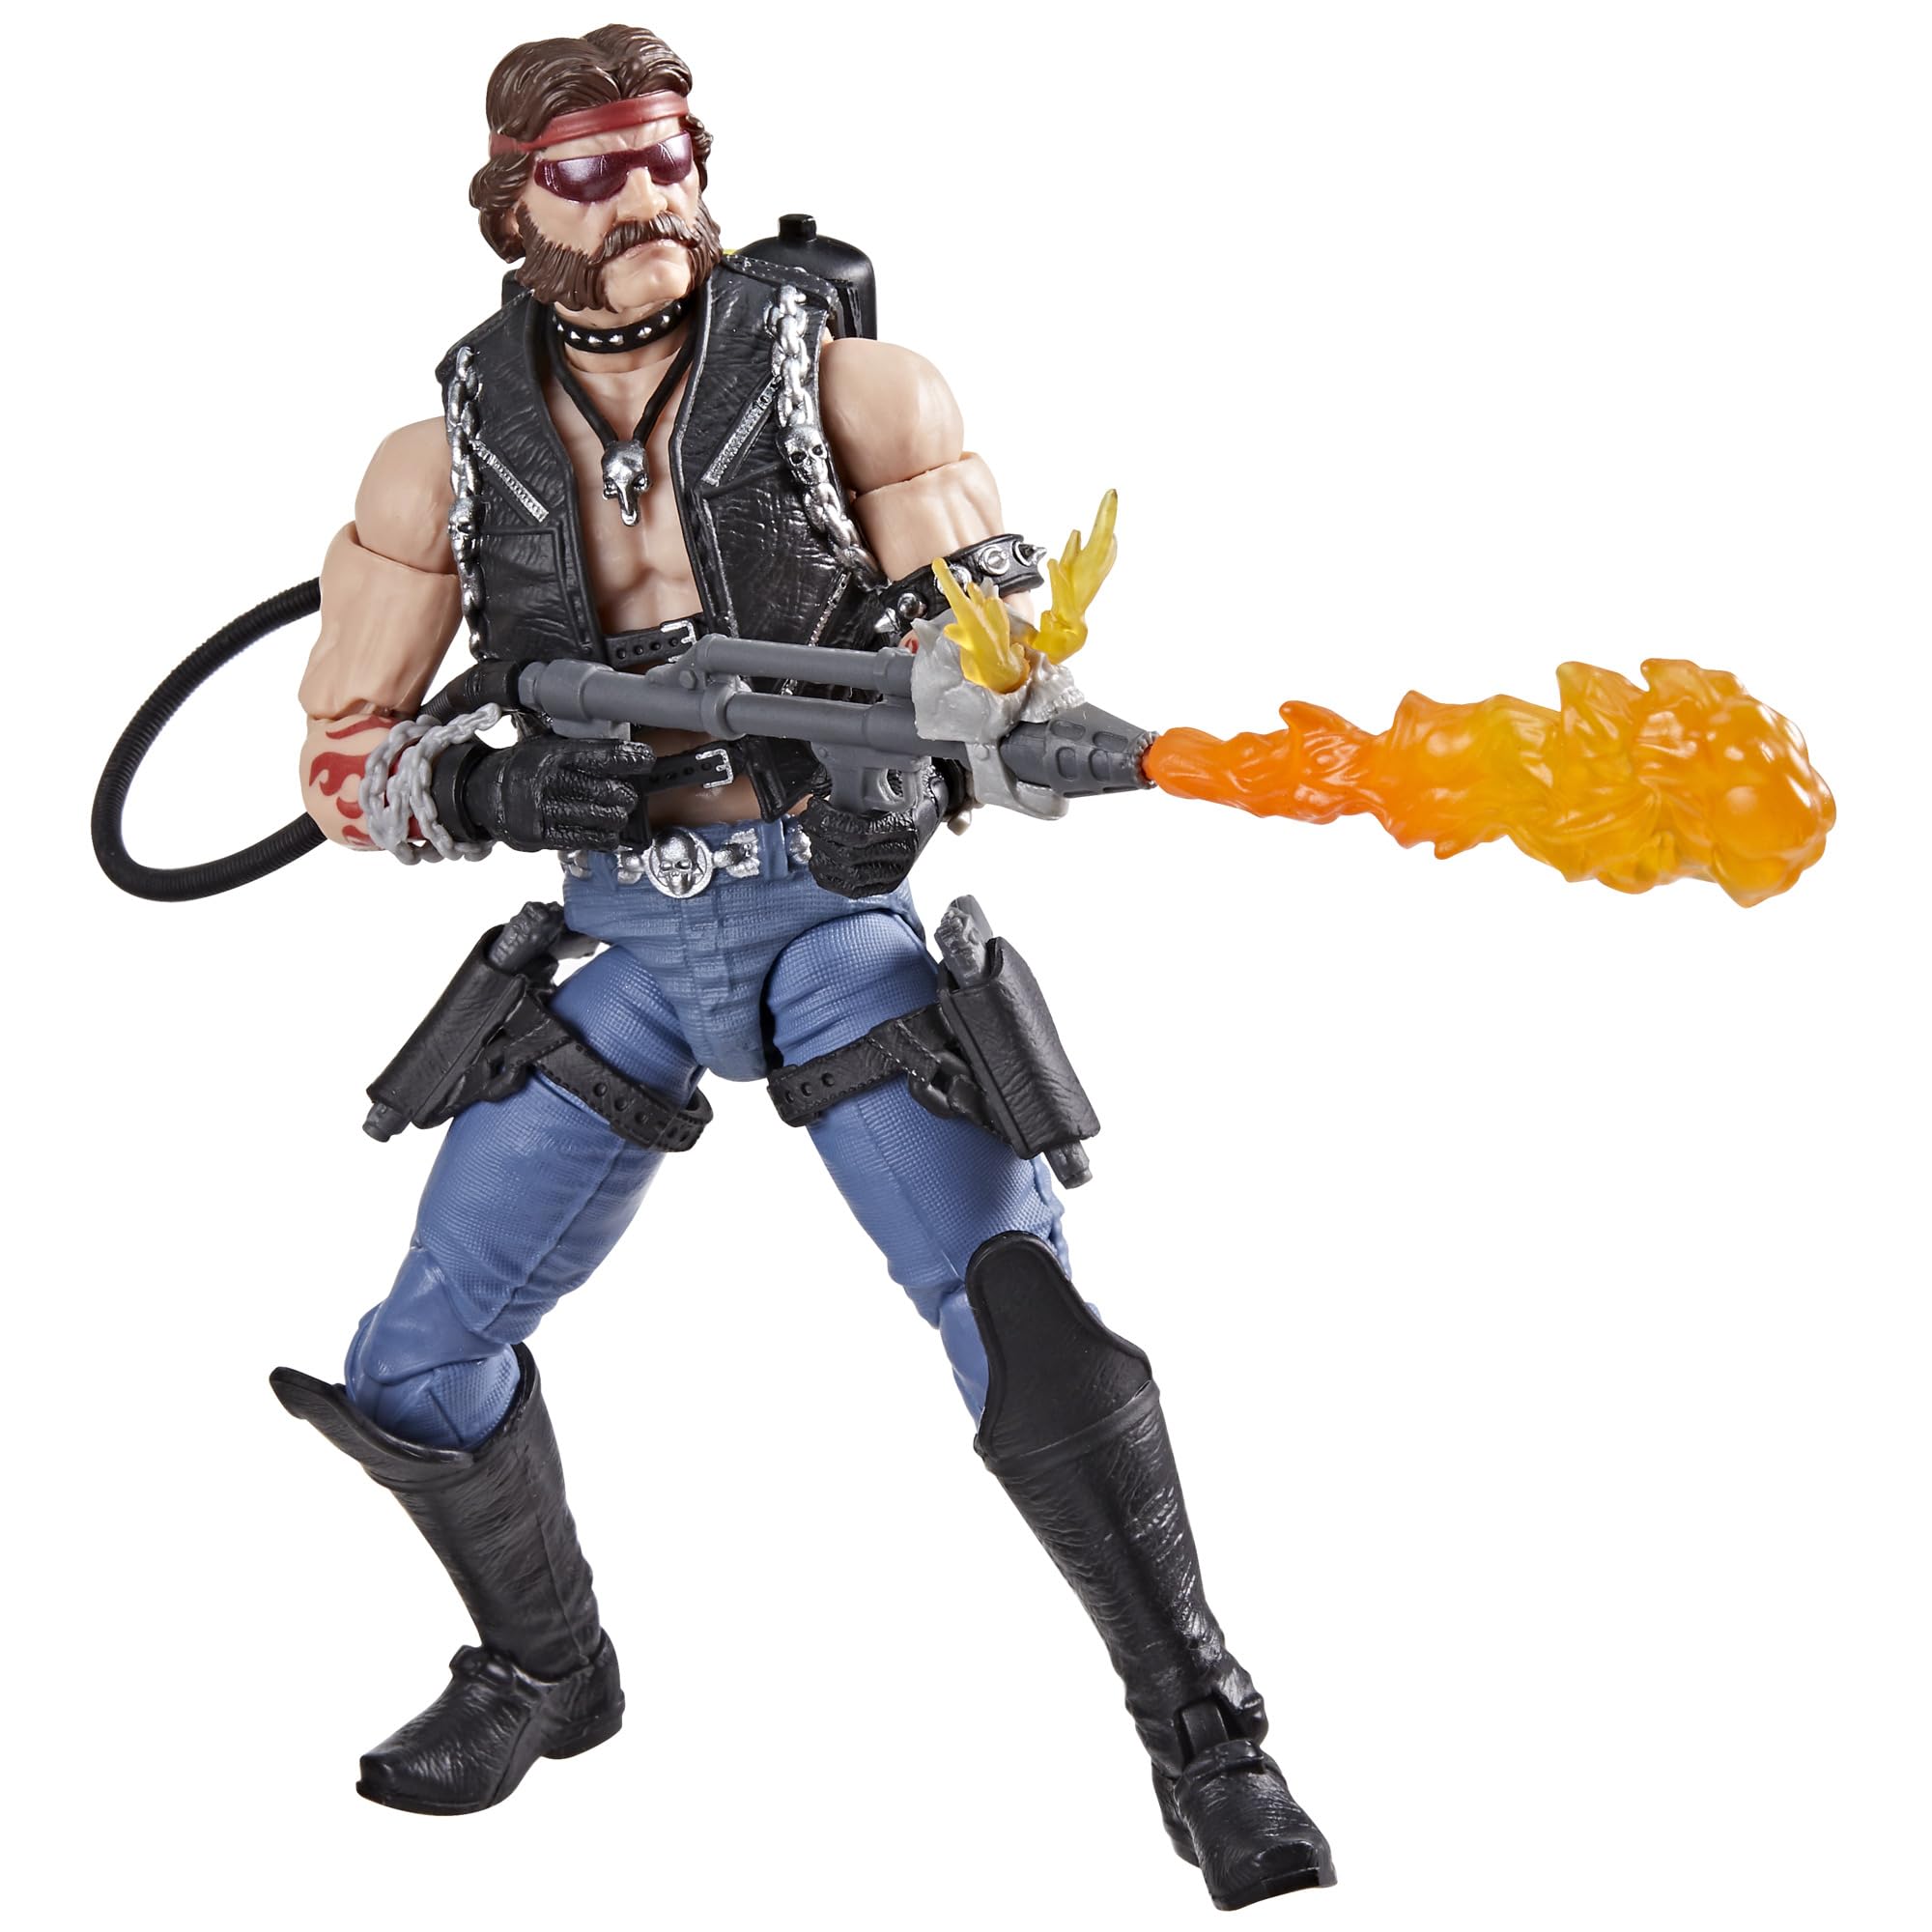 G.I. Joe Classified Series #123, Dreadnok Torch, Collectible 6-Inch Action Figure with 8 Accessories